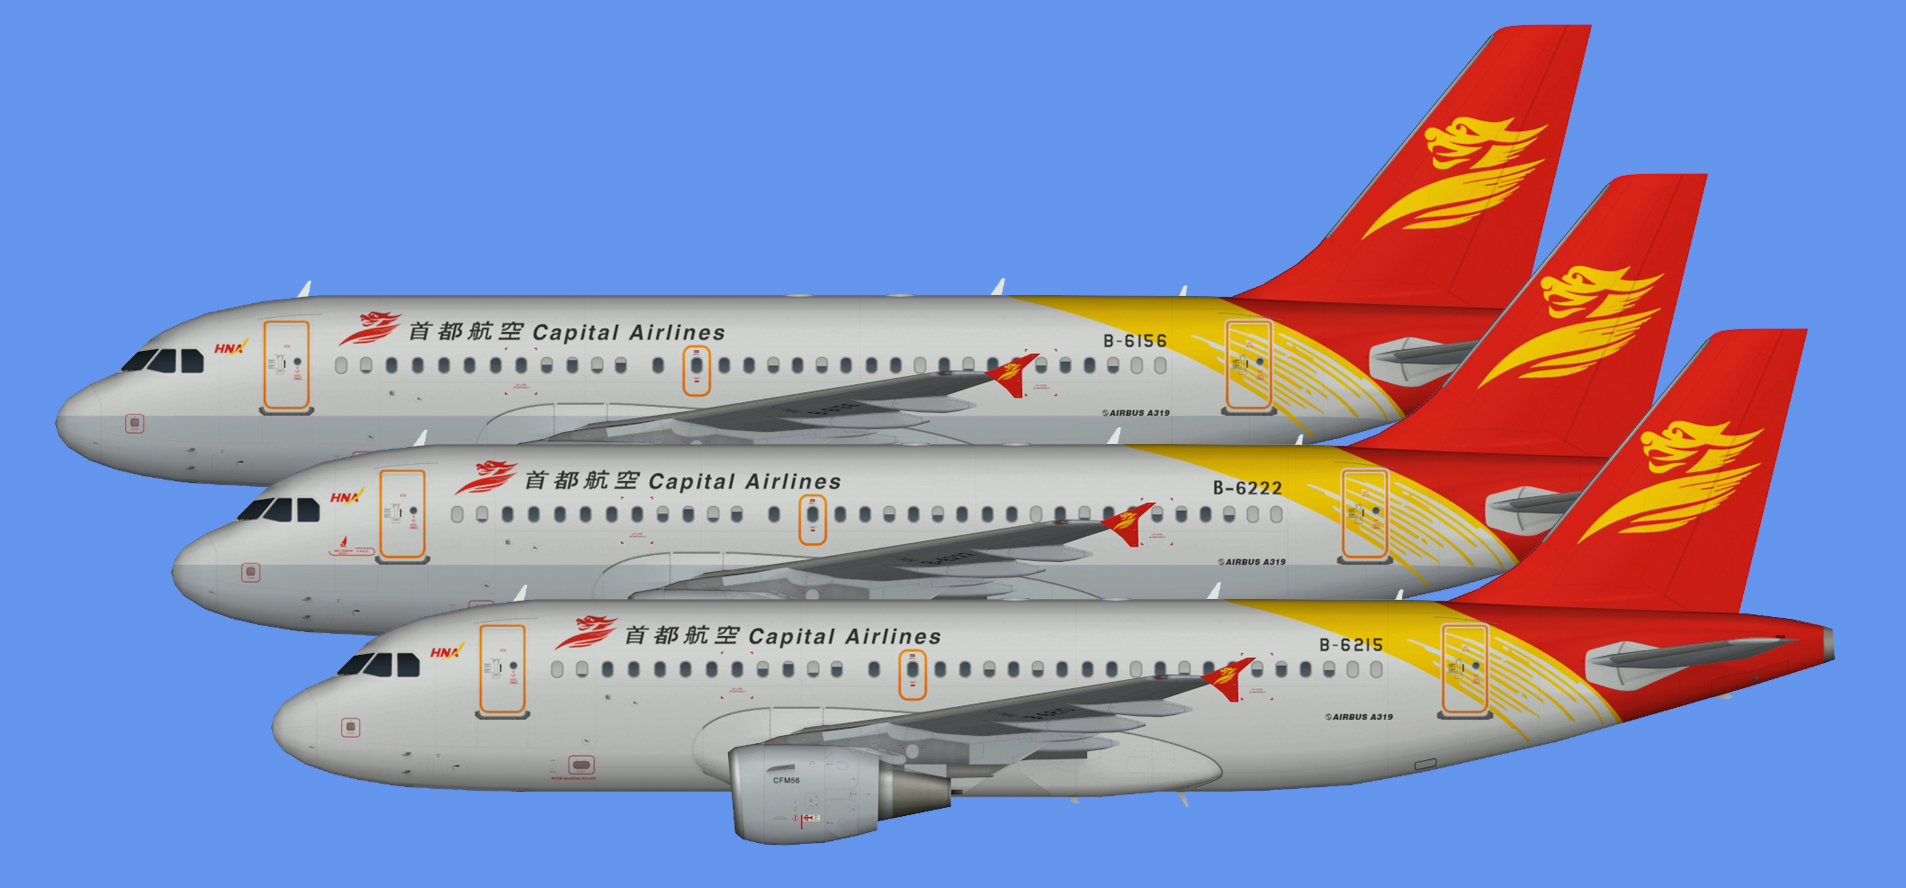 Capital Airlines Airbus A319 CFM